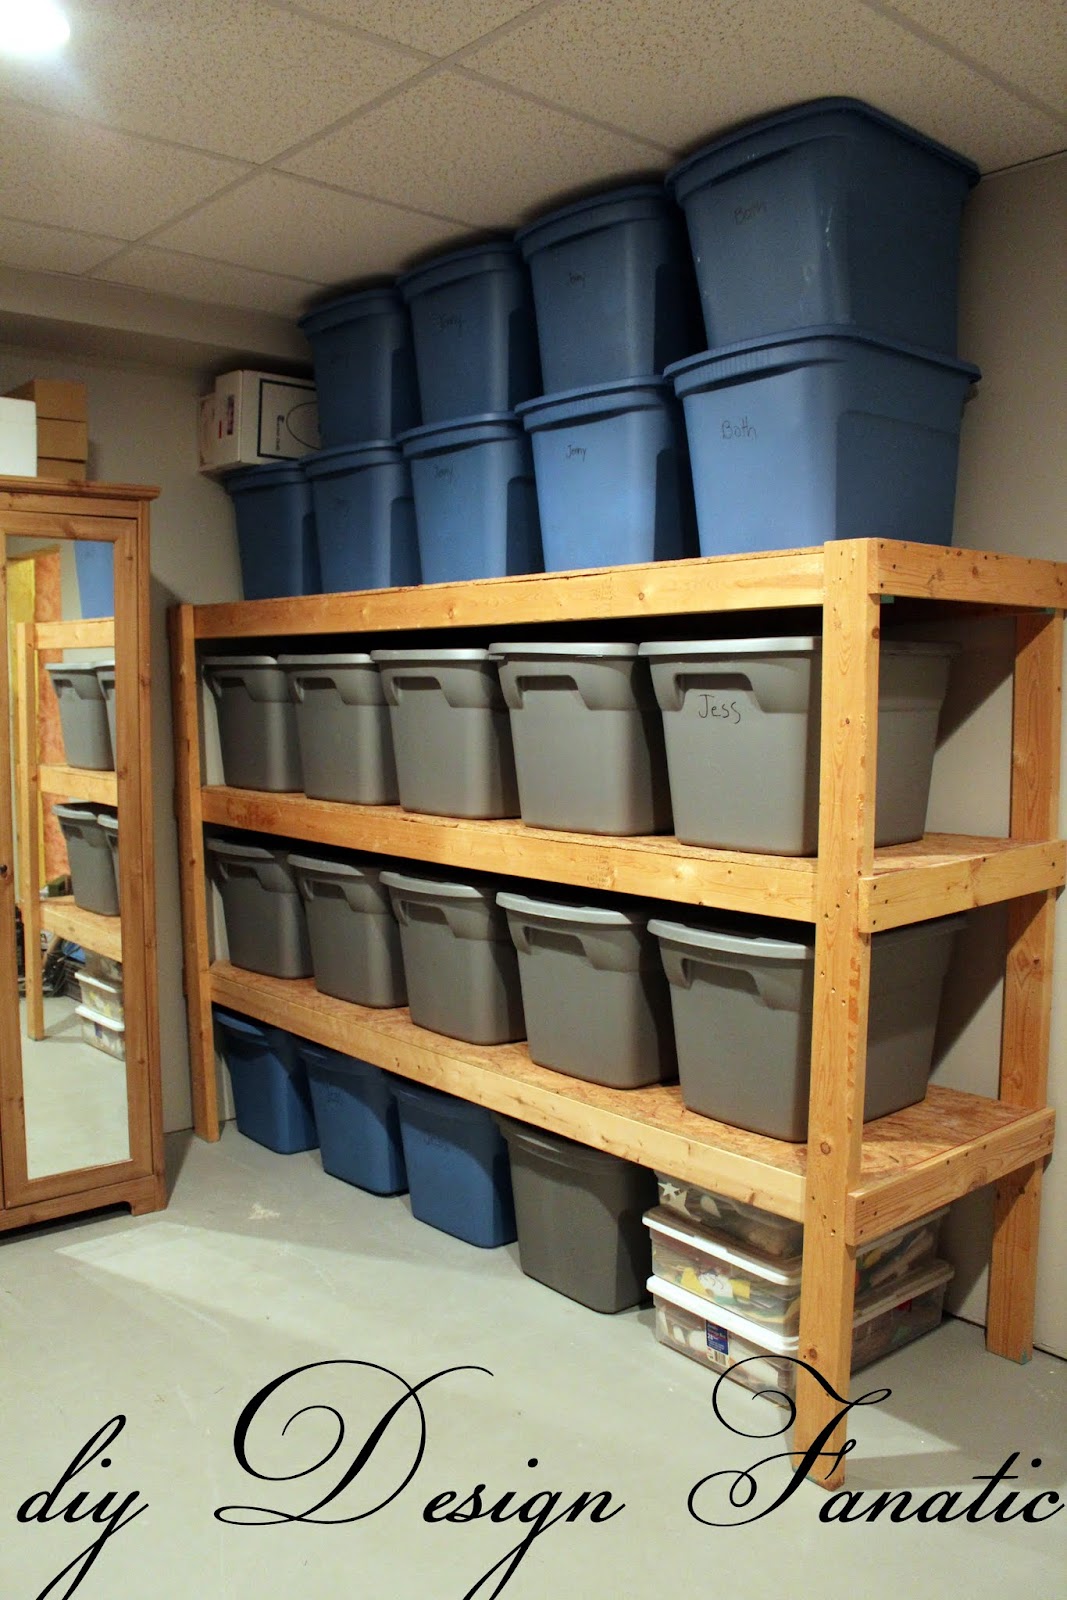 here s what the basement storage room looks like the room ...